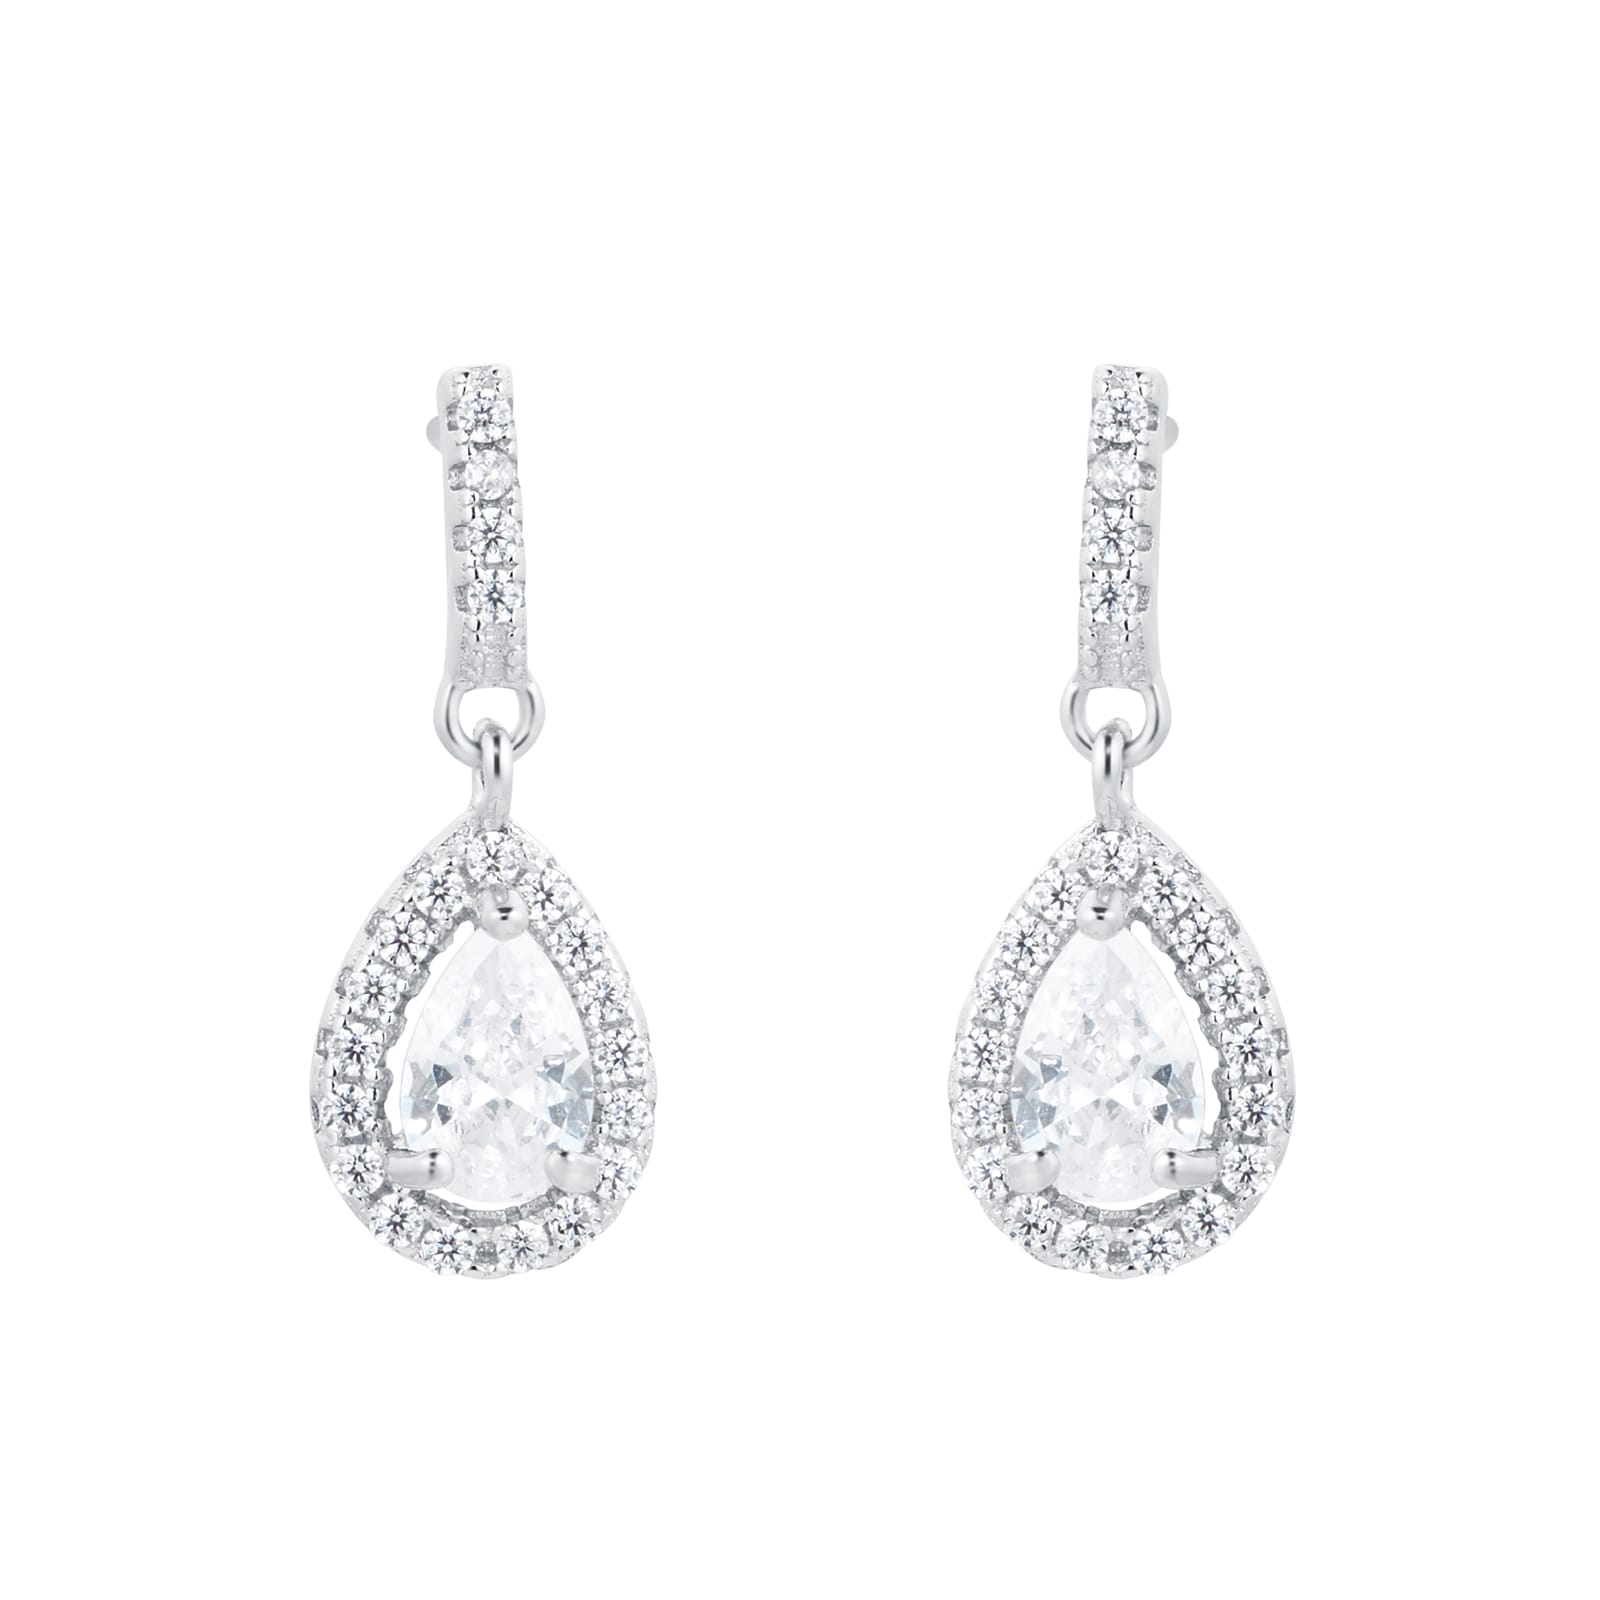 Amazon.com: Vanbelle Sterling Silver Jewelry - Rhodium Plated with 925  Stamp - Pear Drop Earring with Cubic Zirconia Stones - Elegant Handcrafted  Earring for Women: Clothing, Shoes & Jewelry